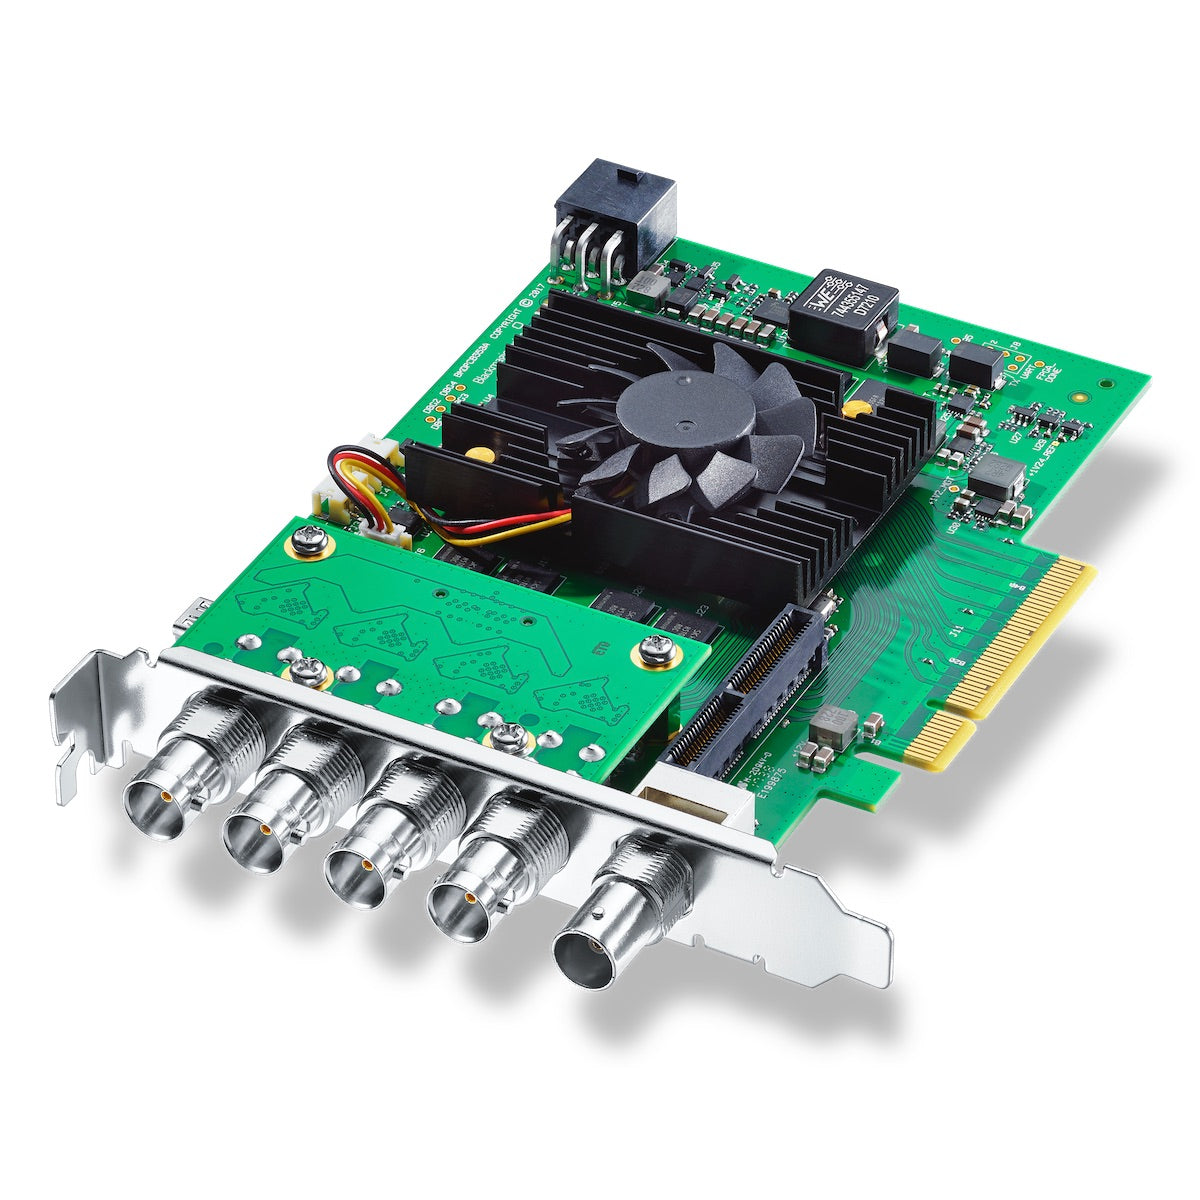 Blackmagic DeckLink 8K Pro - High Res PCIe Capture and Playback Card